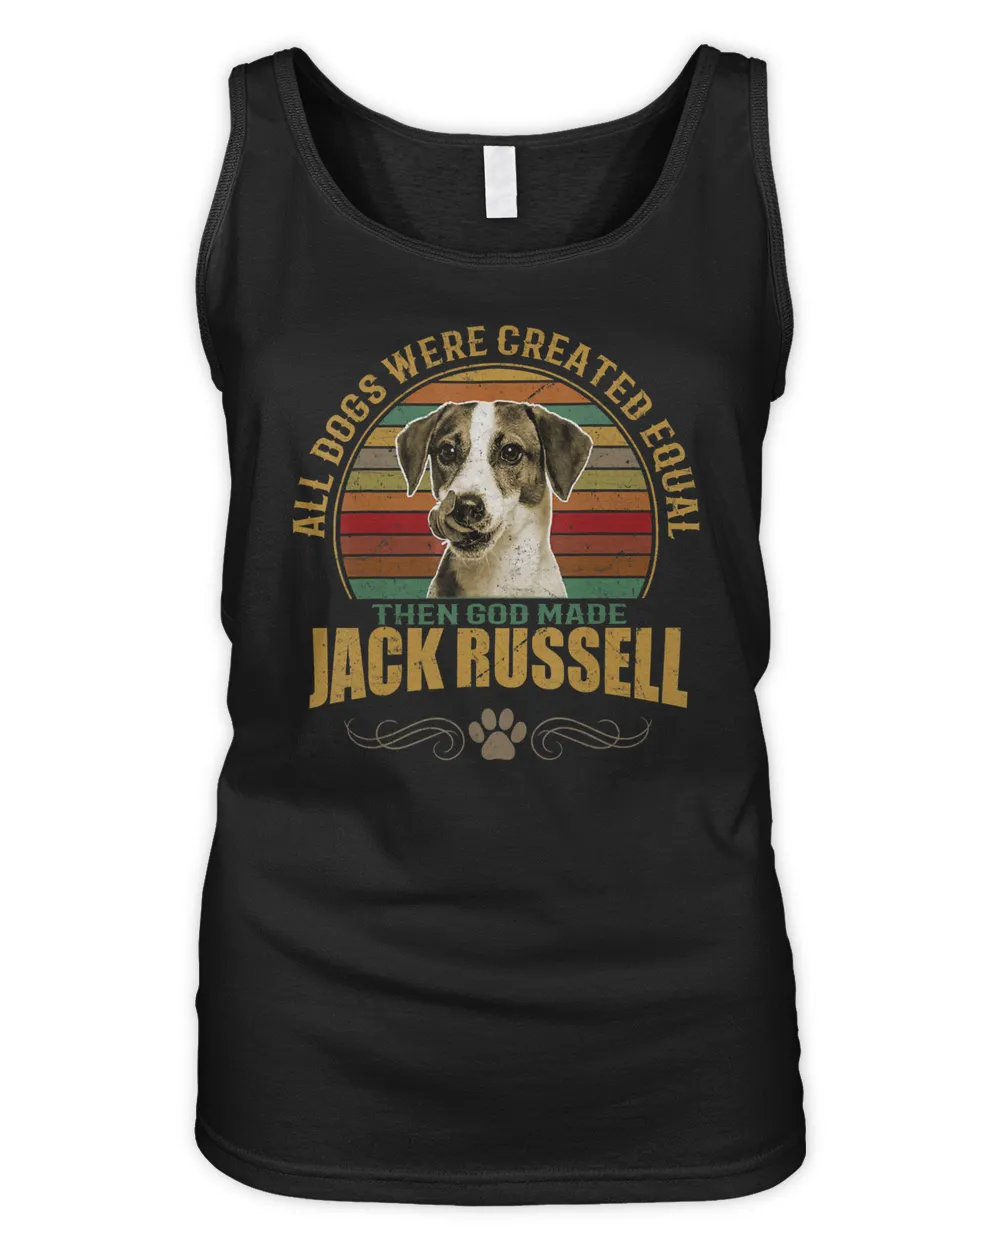 Jack Russell Terrier Dog - All Dogs Were Created Equal T-Shirt